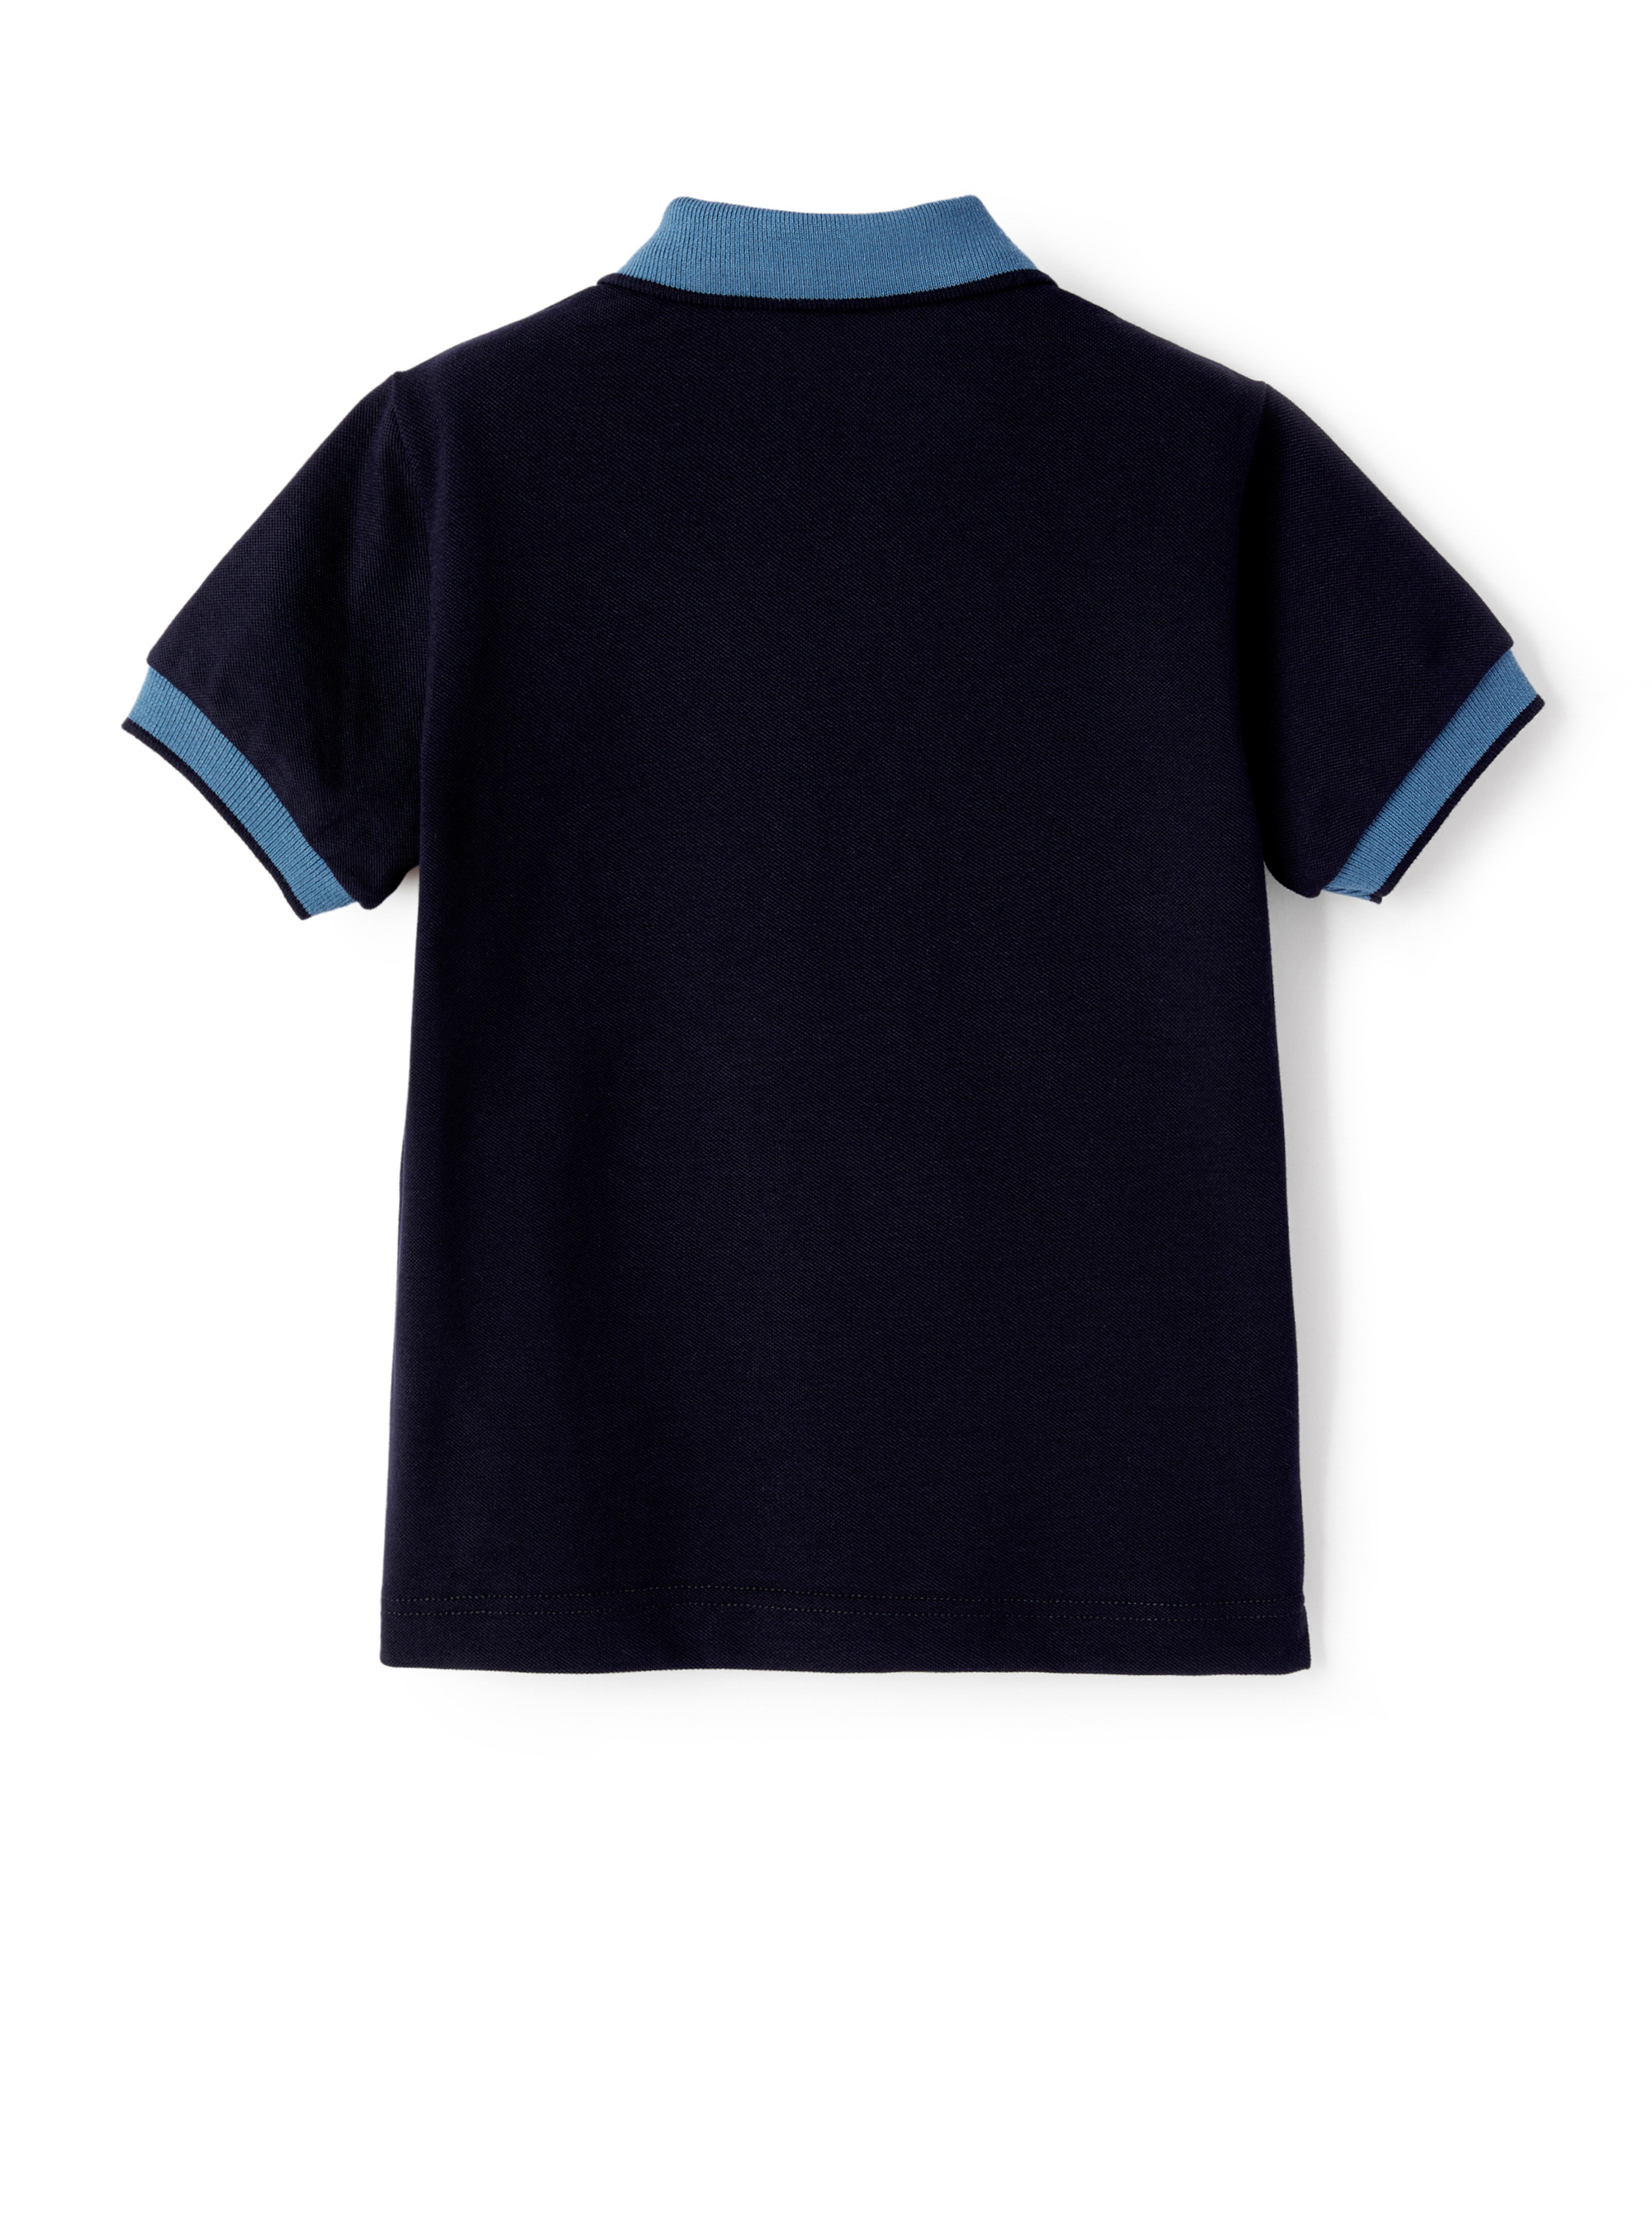 Piquet polo shirt with contrasting details - Blue | Il Gufo